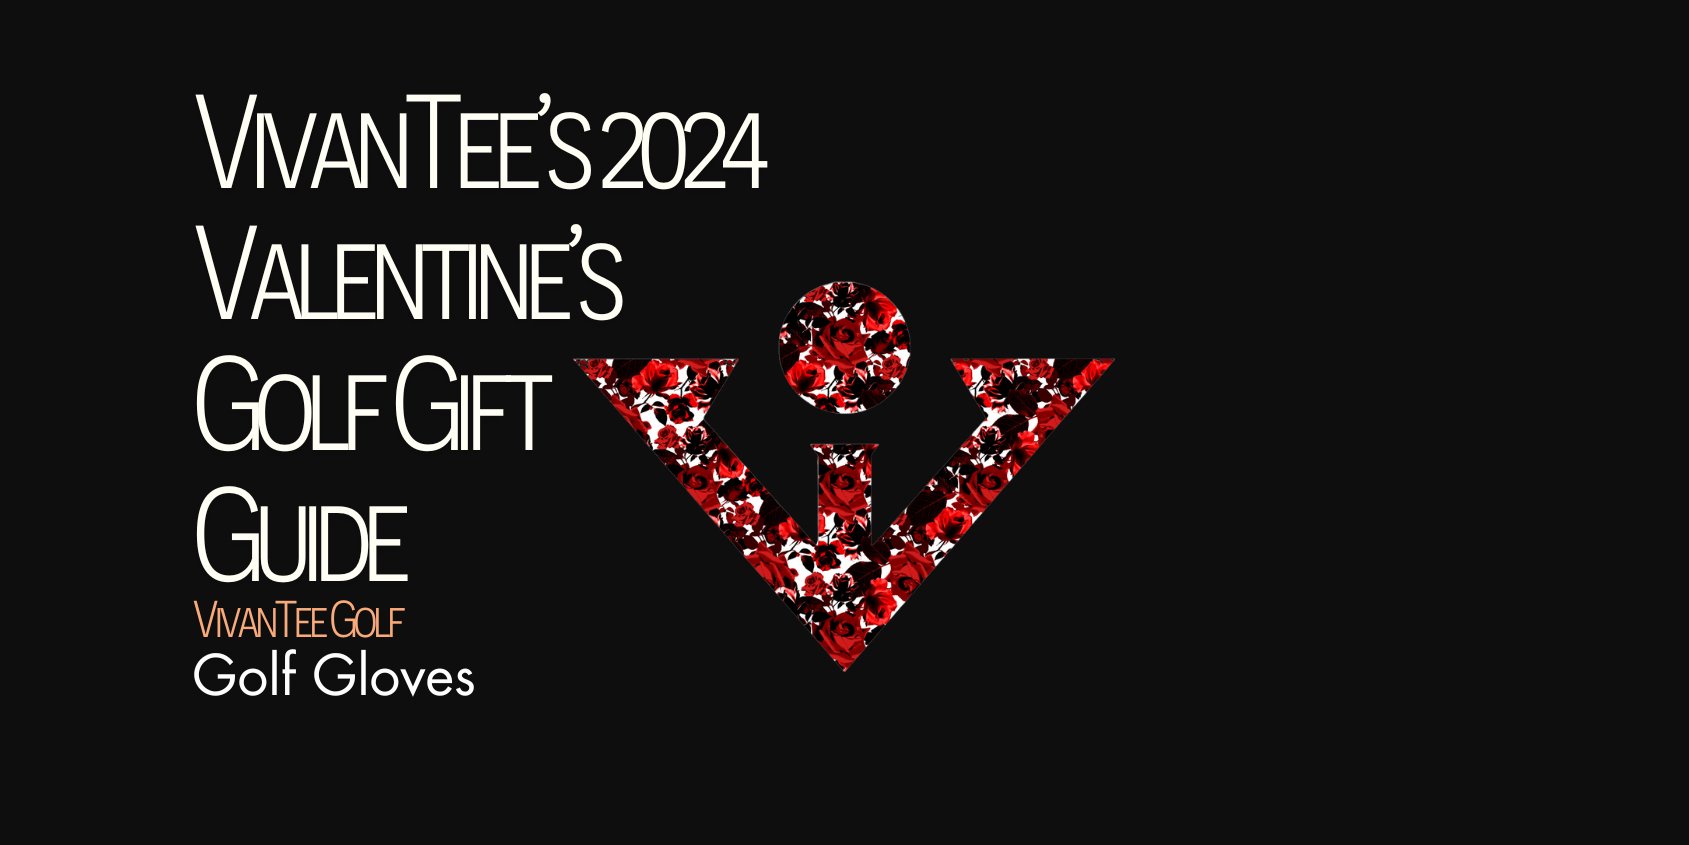 VivanTee logo with floral red rose pattern inside to represent our 2024 Valentine's Golf gift guide for him and her.